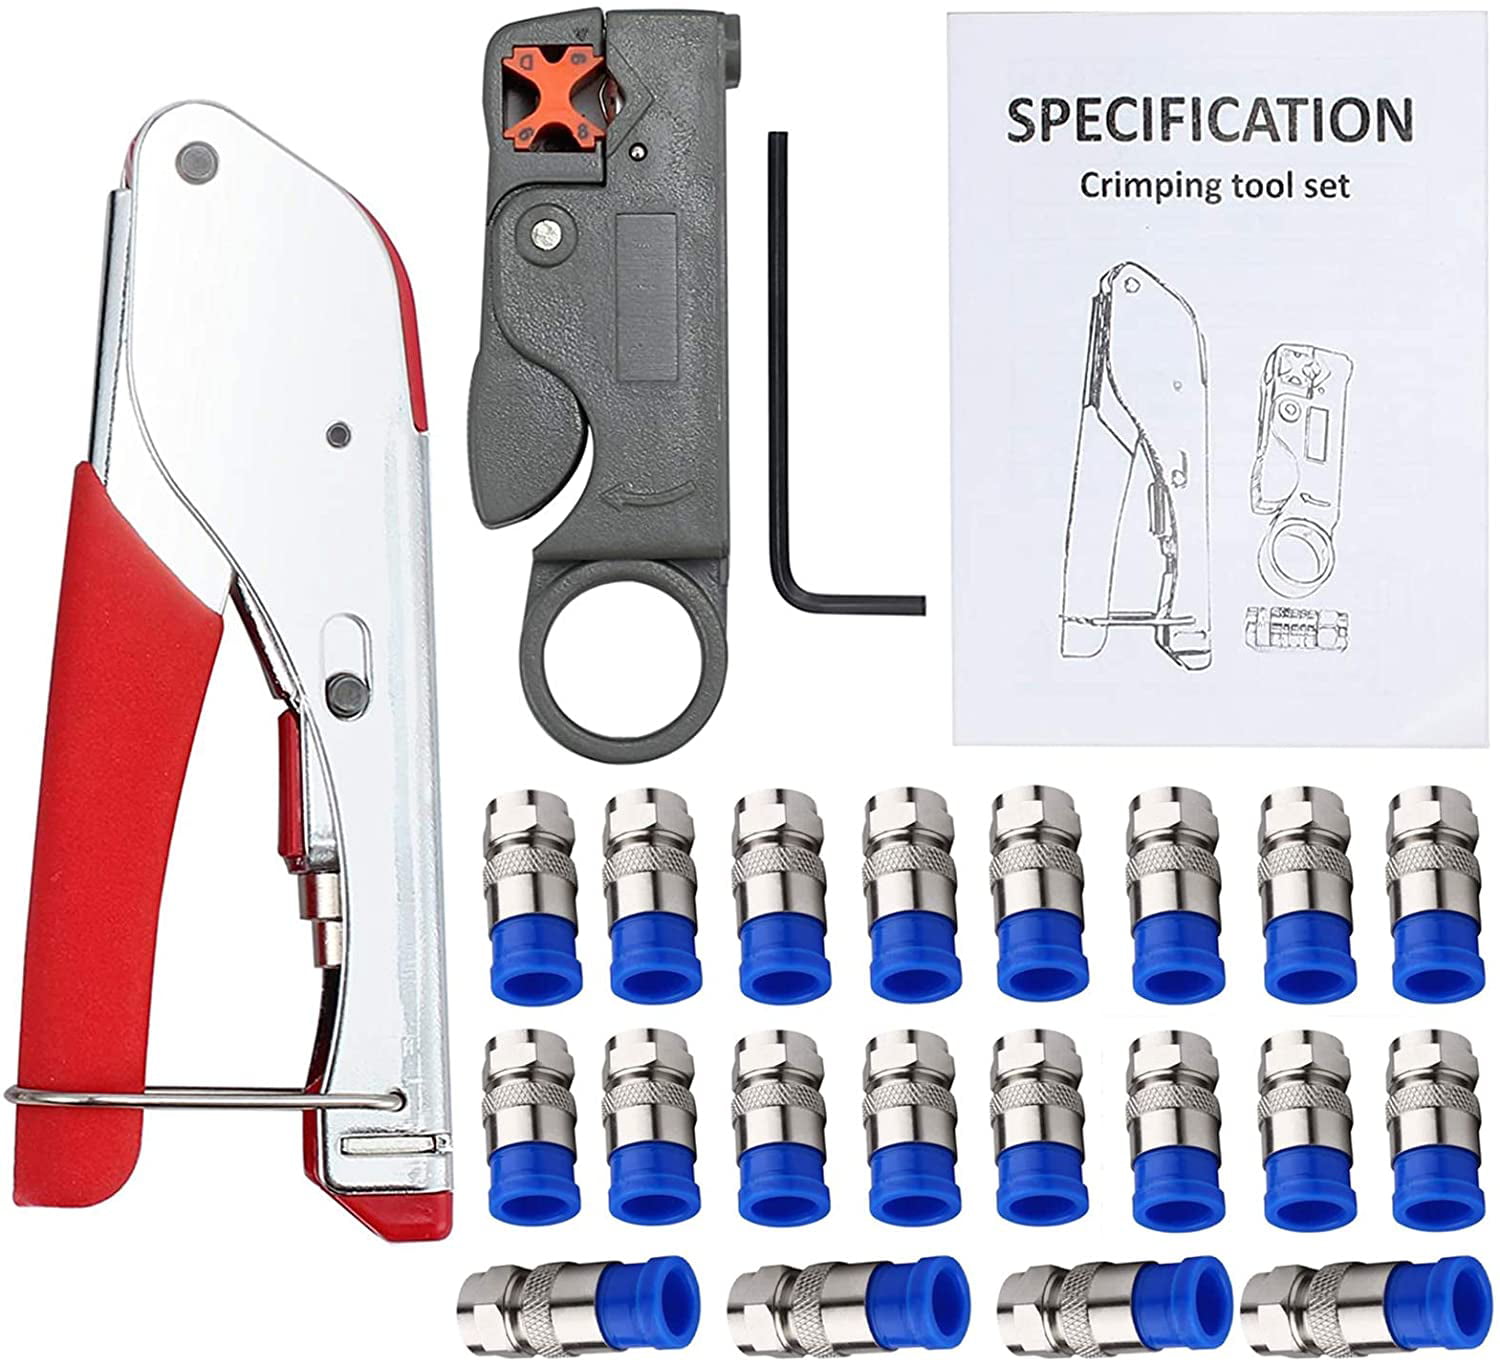 Black-F Coax Crimper Tool Kit Coaxial Compression Stripping Tool Cable Wire Stripper with with 20 PCS F RG6 RG59 Connectors #7921 